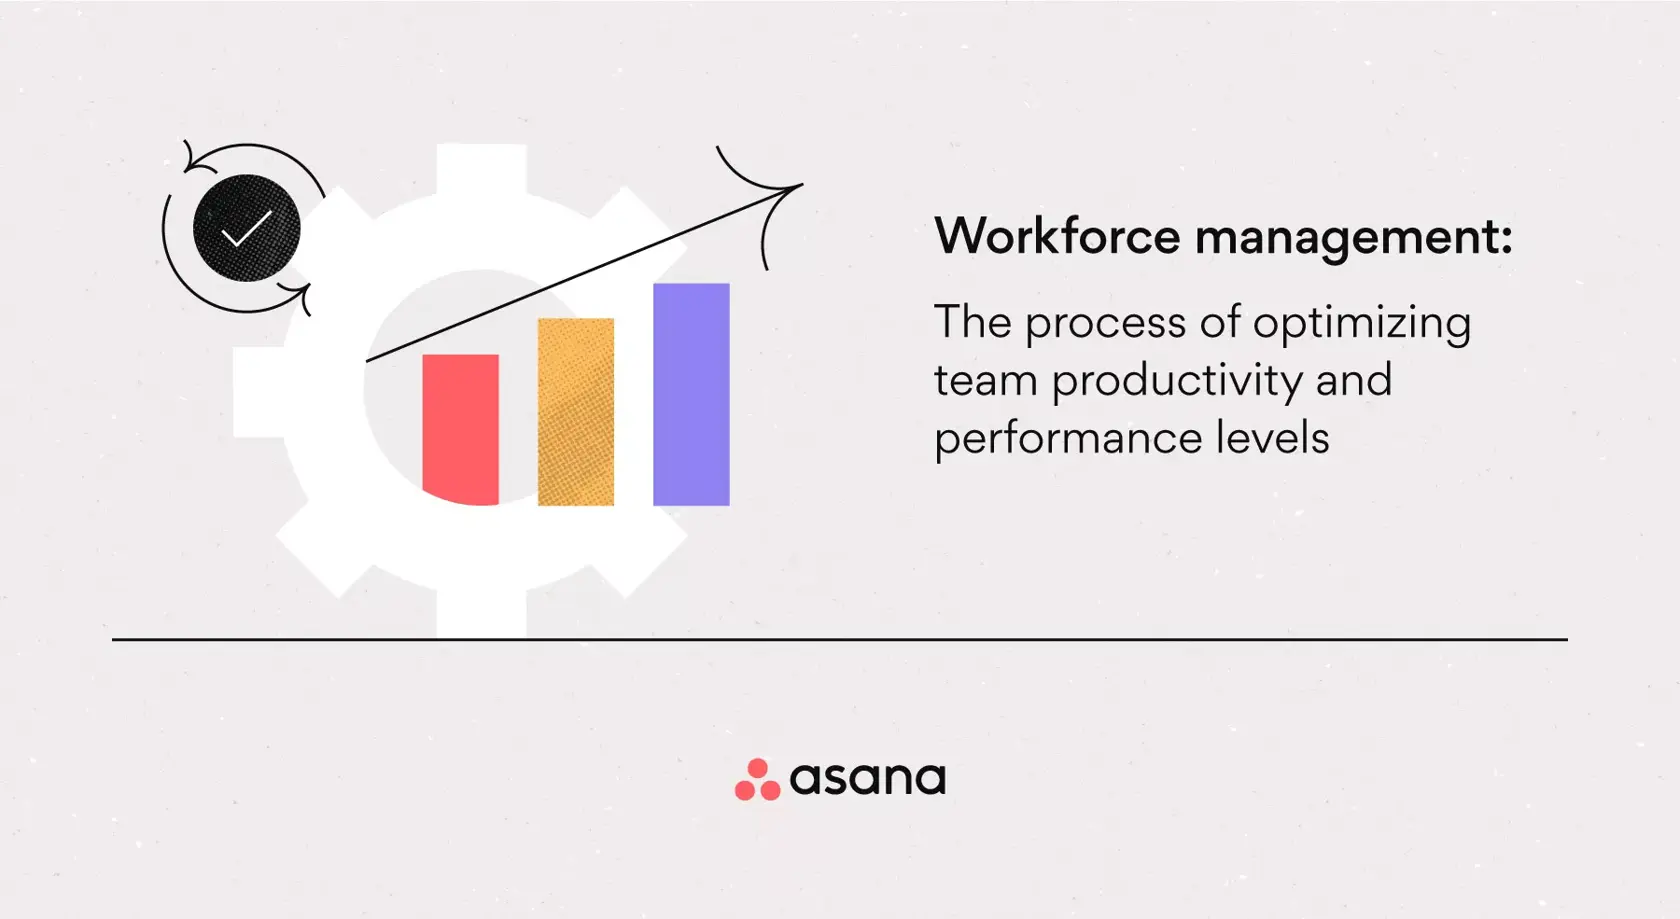 [inline illustration] What is workforce management? [infographic]